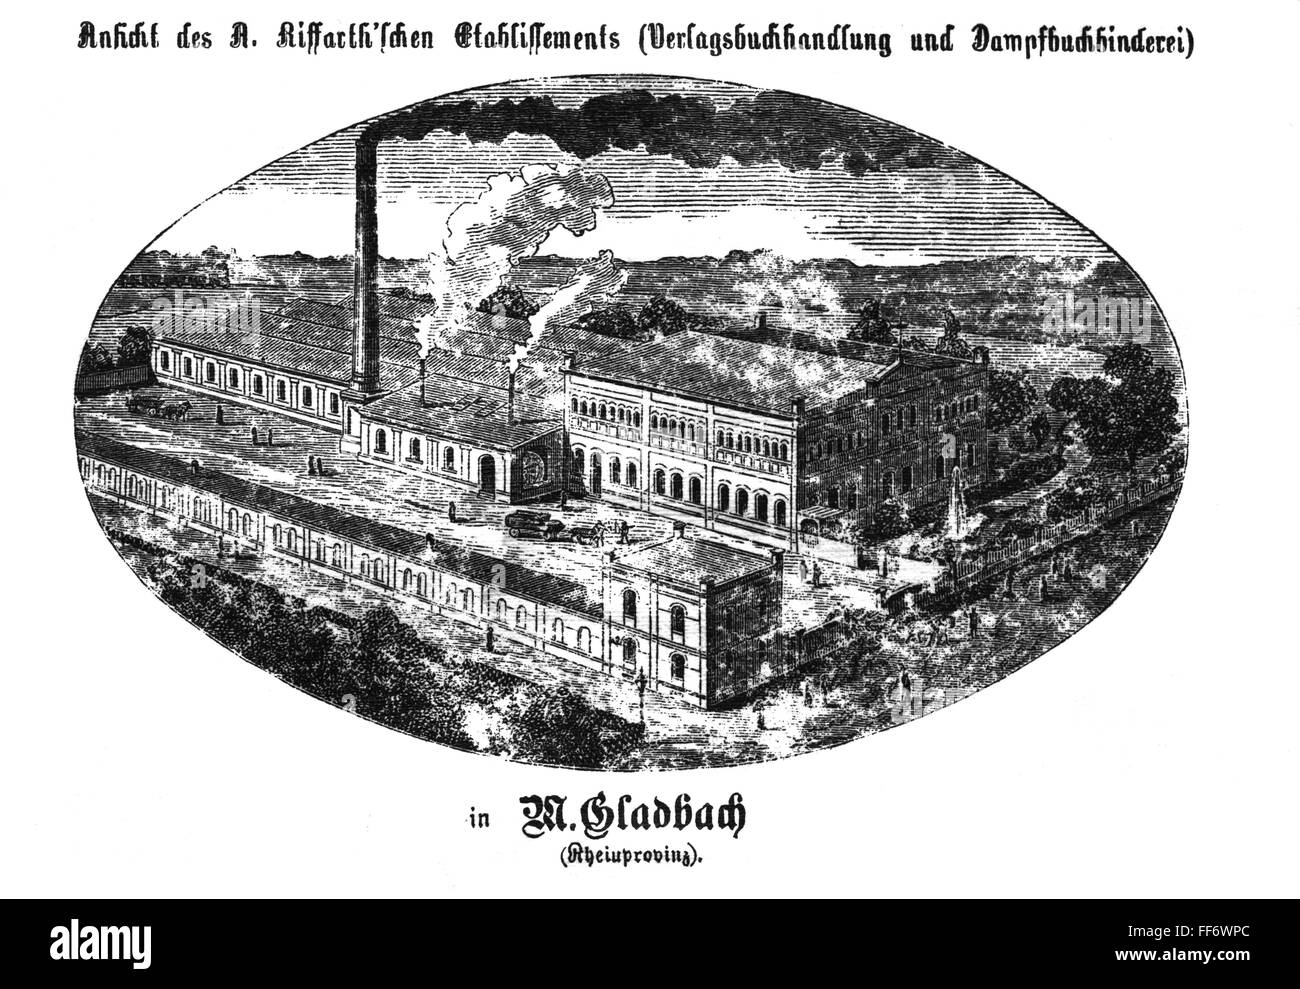 industry, print, A. Riffarth print shop, exterior view, Mönchengladbach, drawing, 19th century, out of: Das häusliche Glück, back cover, eleventh improved edition, A. Riffarth publishing house, Mönchengladbach - Leipzig 1882, Additional-Rights-Clearences-Not Available Stock Photo